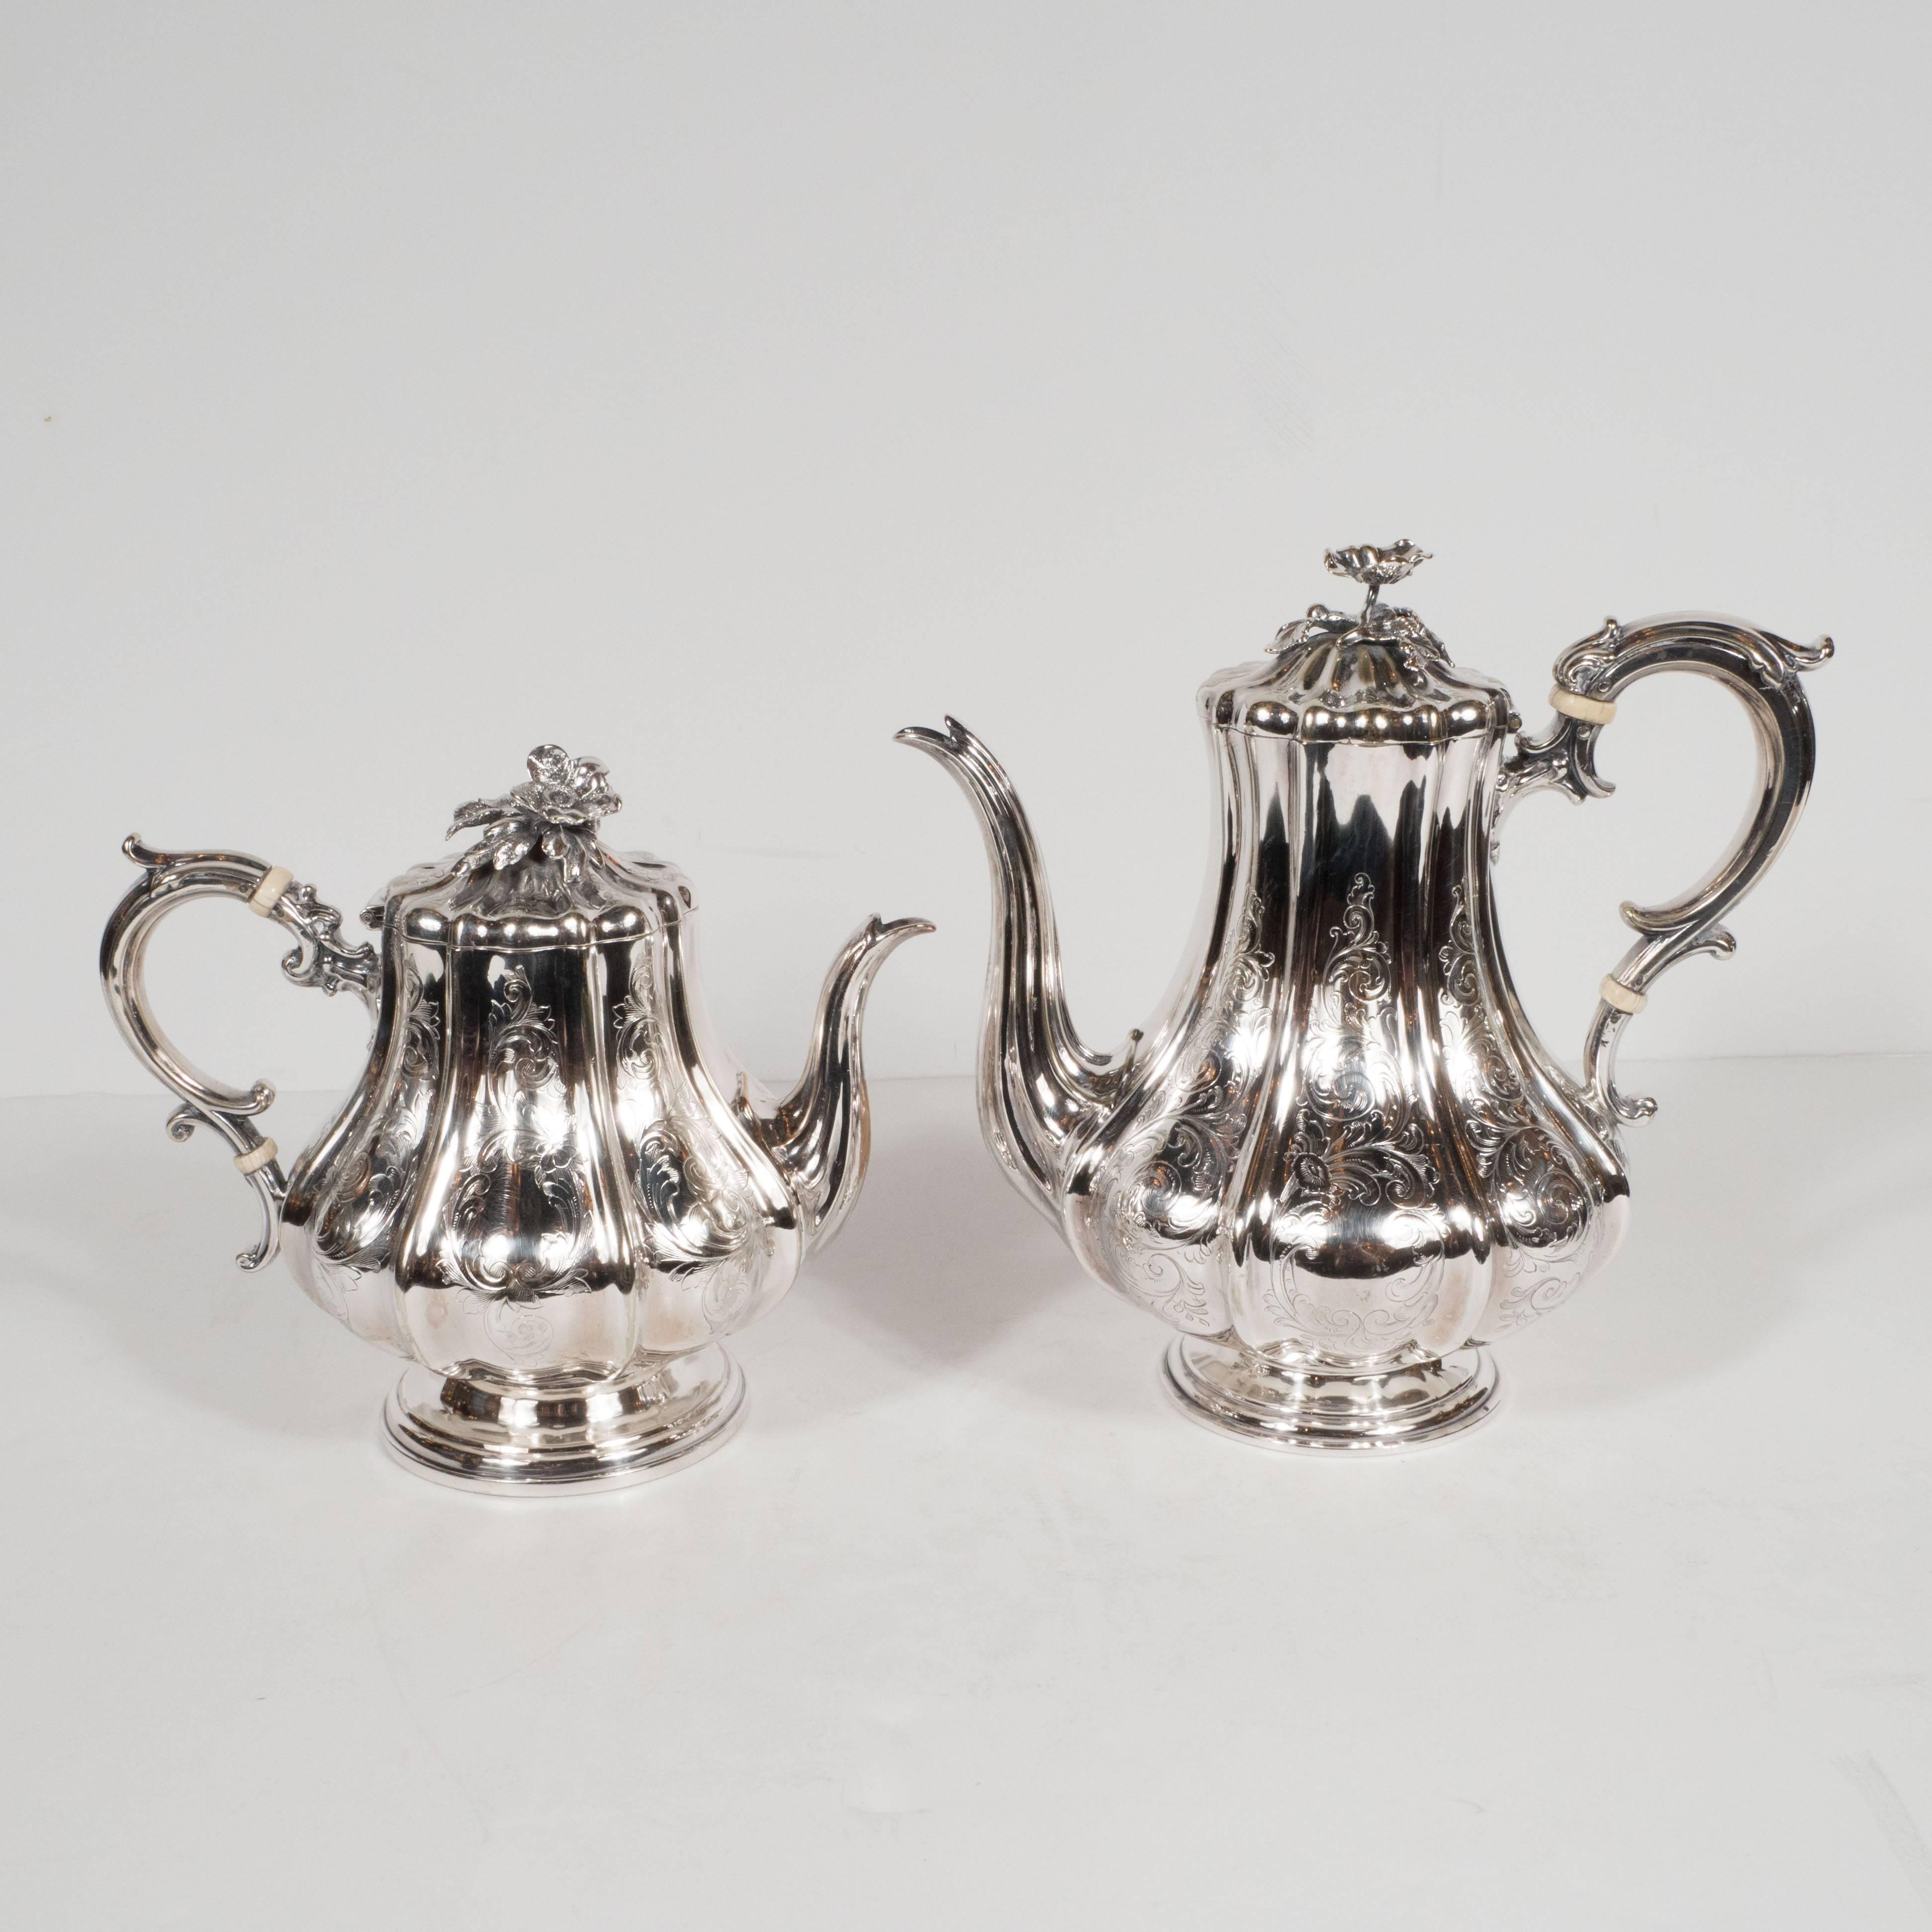 This lustrous six piece coffee/tea service was created circa 1950 by the legendary silversmiths Elkington & Co of Birmingham England. It includes a tray, a samovar, a coffee and tea pot, a sugar bowl, and a cream saucer. While each piece in the